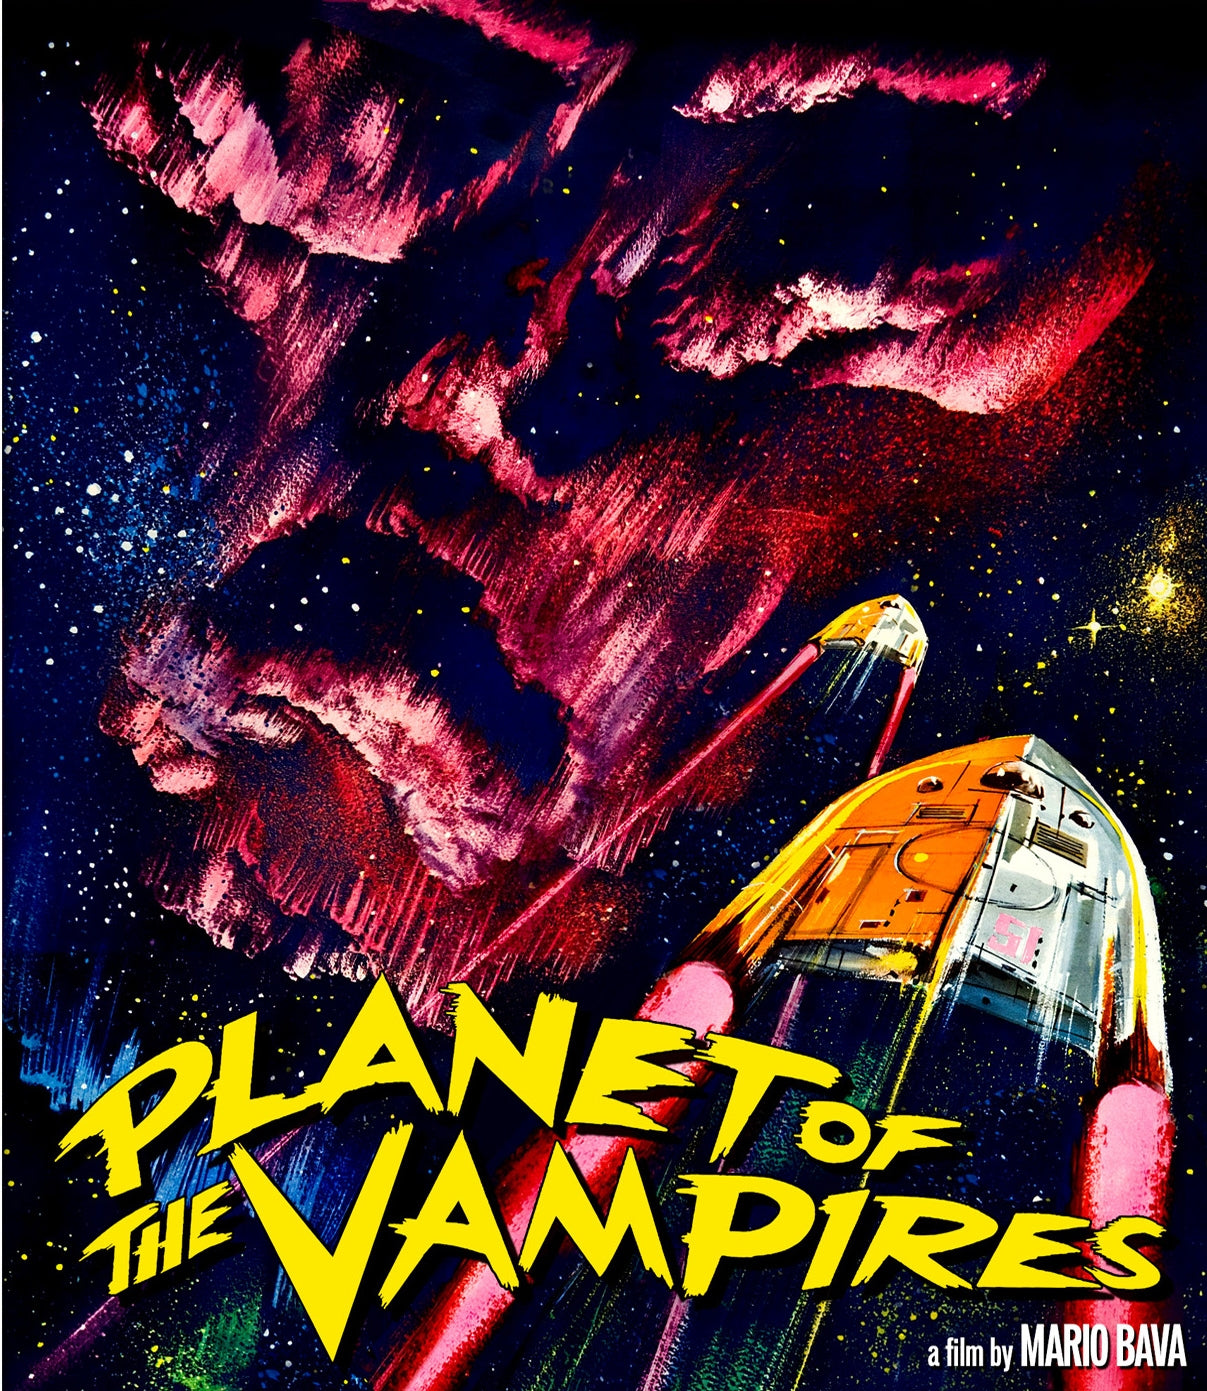 PLANET OF THE VAMPIRES BLU-RAY